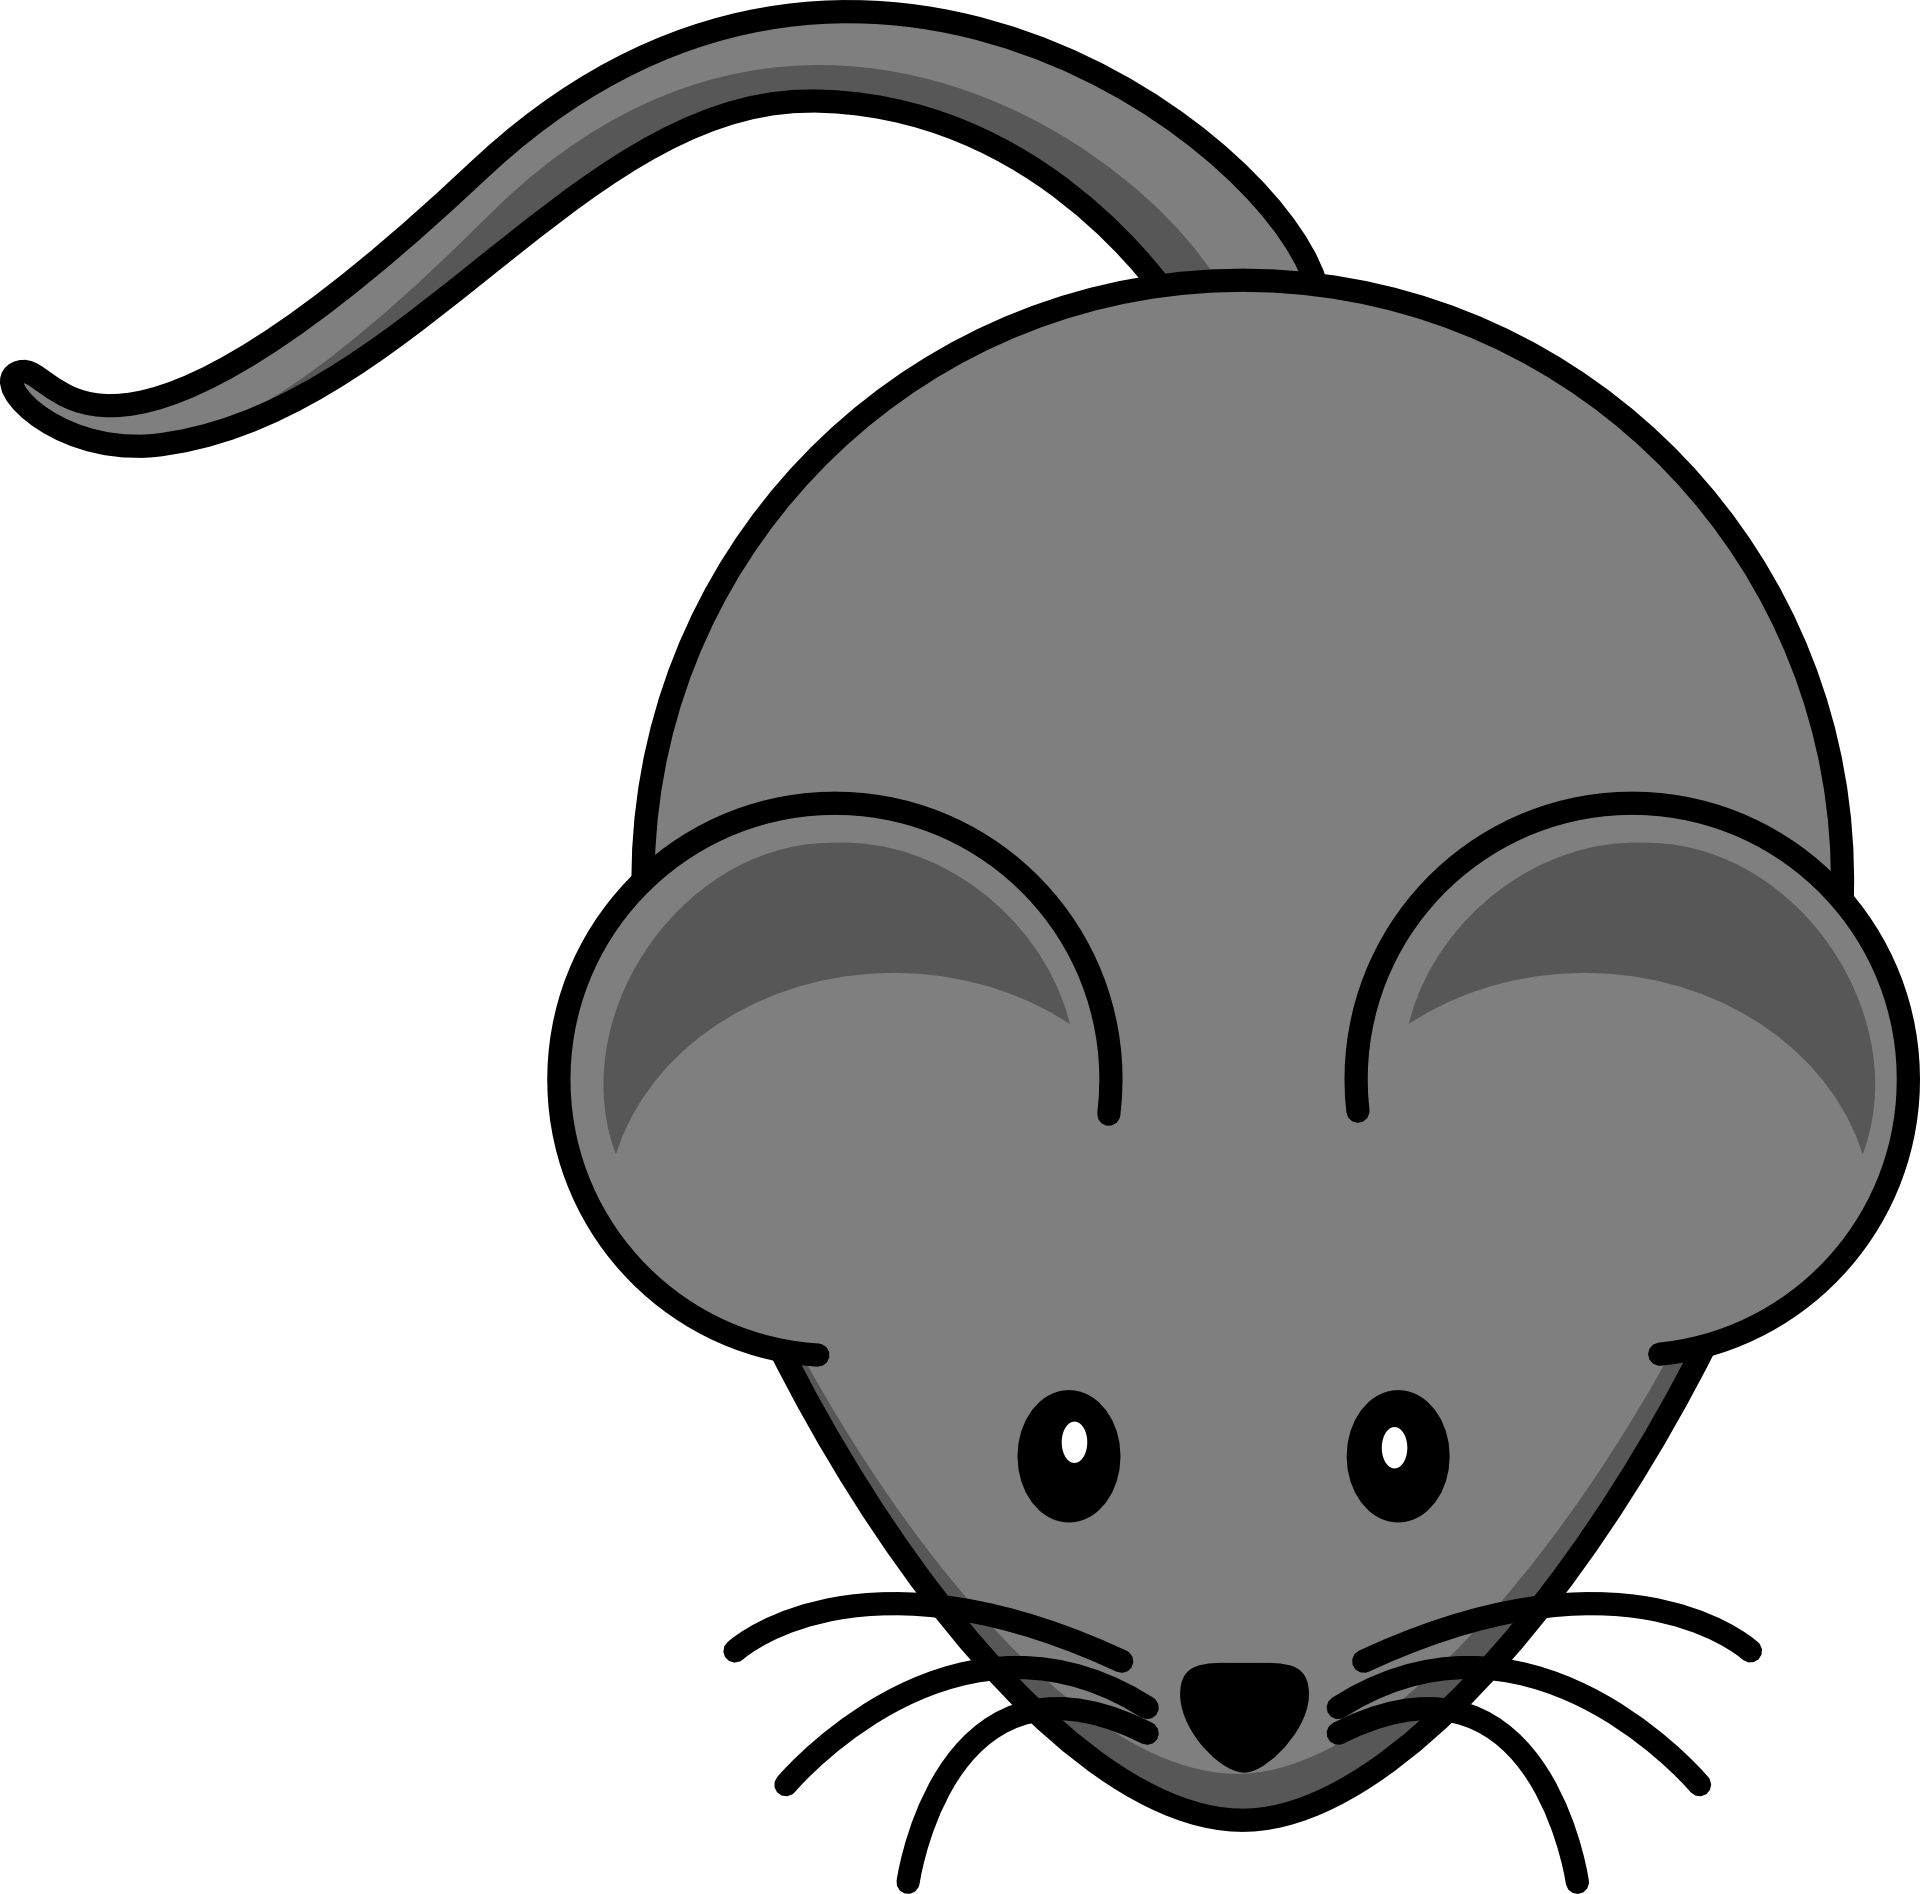 Cute gray mouse clipart free image